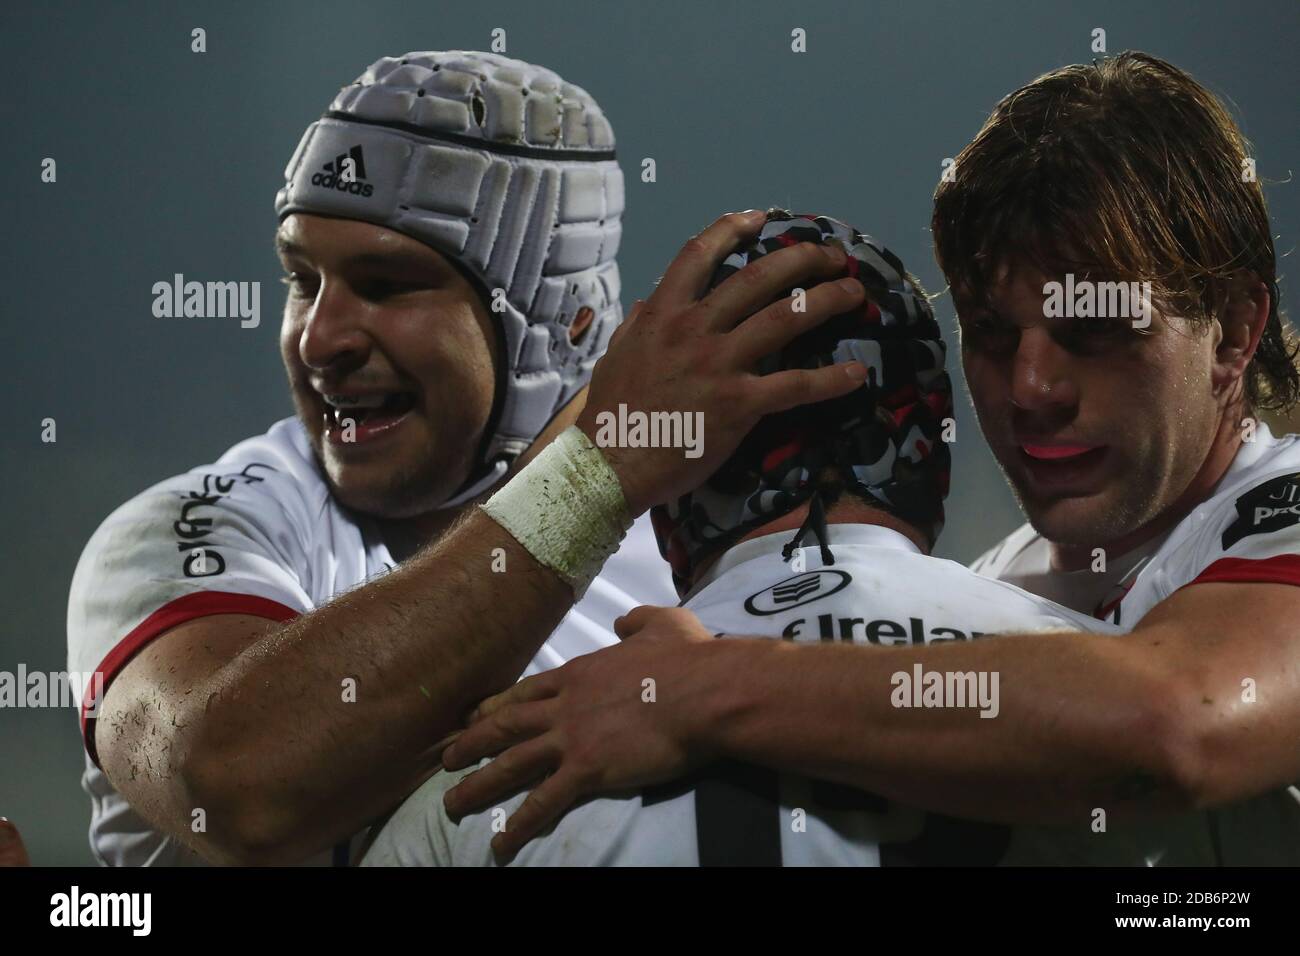 Parma, Italy. 16th Nov, 2020. parma, Italy, Sergio Lanfranchi stadium, 16 Nov 2020, Ulster celebrates the try during Zebre Rugby vs Ulster Rugby - Rugby Guinness Pro 14 match - Credit: LM/Massimiliano Carnabuci Credit: Massimiliano Carnabuci/LPS/ZUMA Wire/Alamy Live News Stock Photo